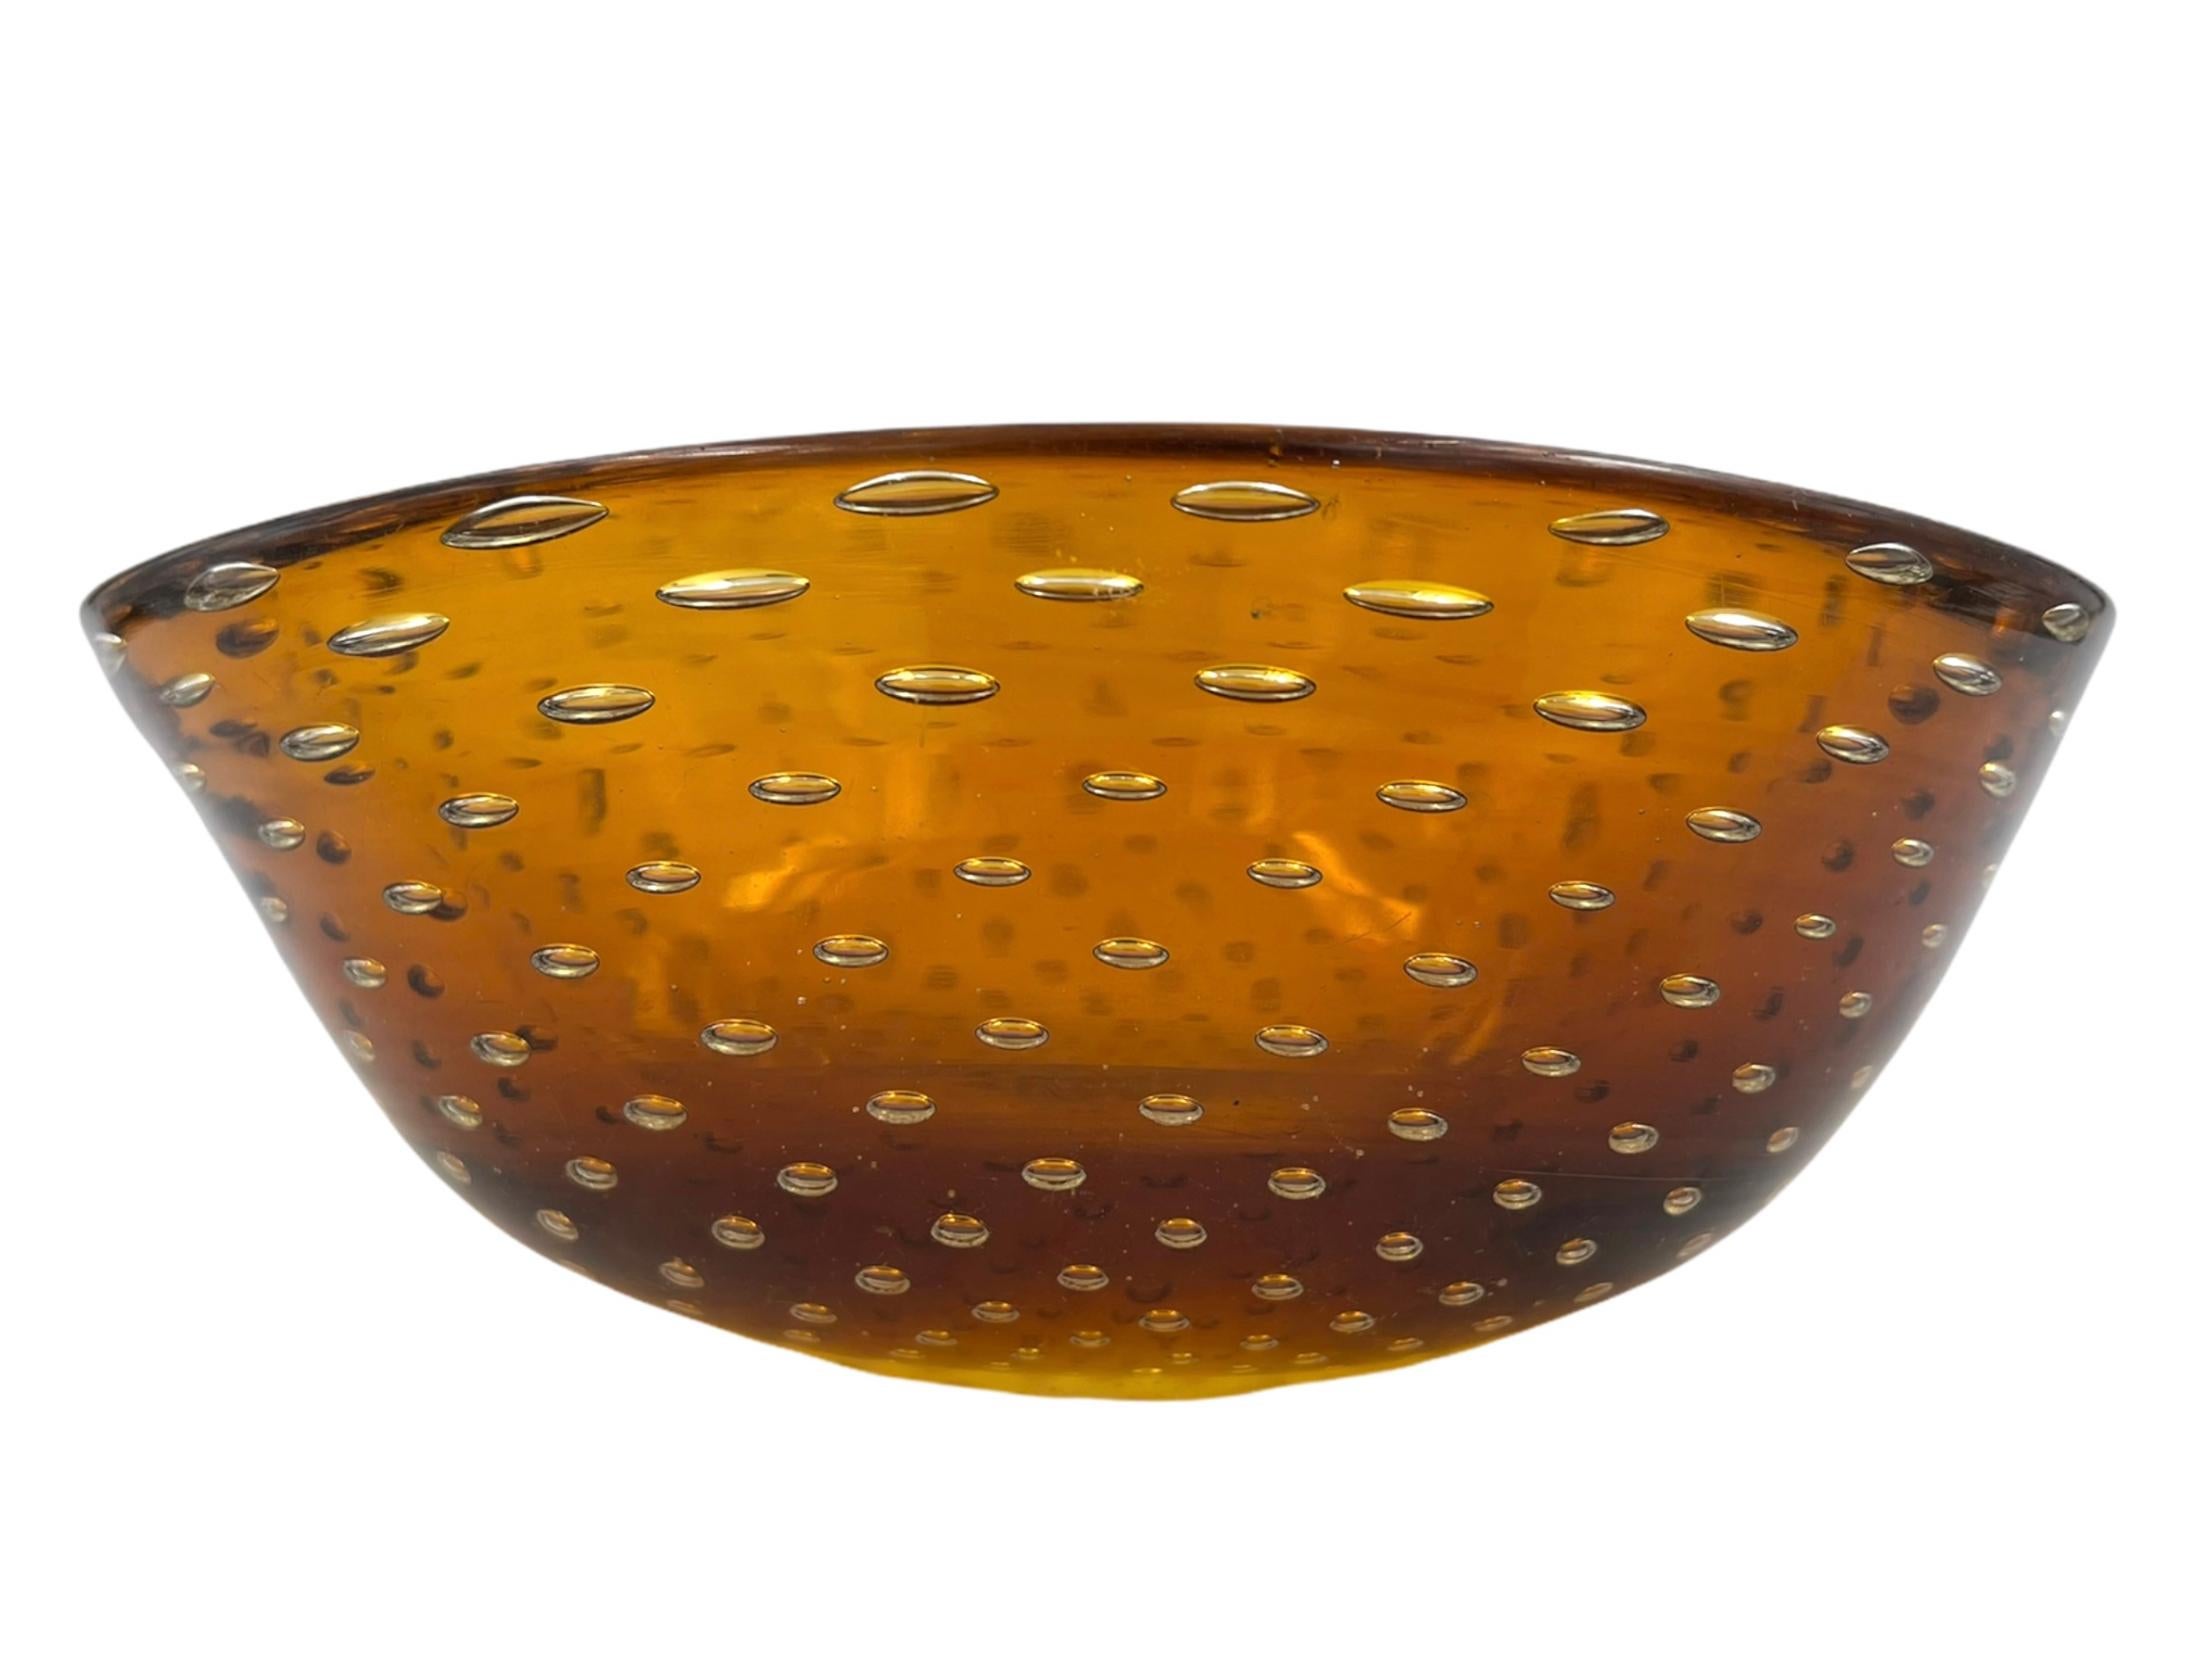 Italian Mid-Century Modern Murano Art Glass Bowl in Amber Controlled Bubble, Italy 1970s For Sale